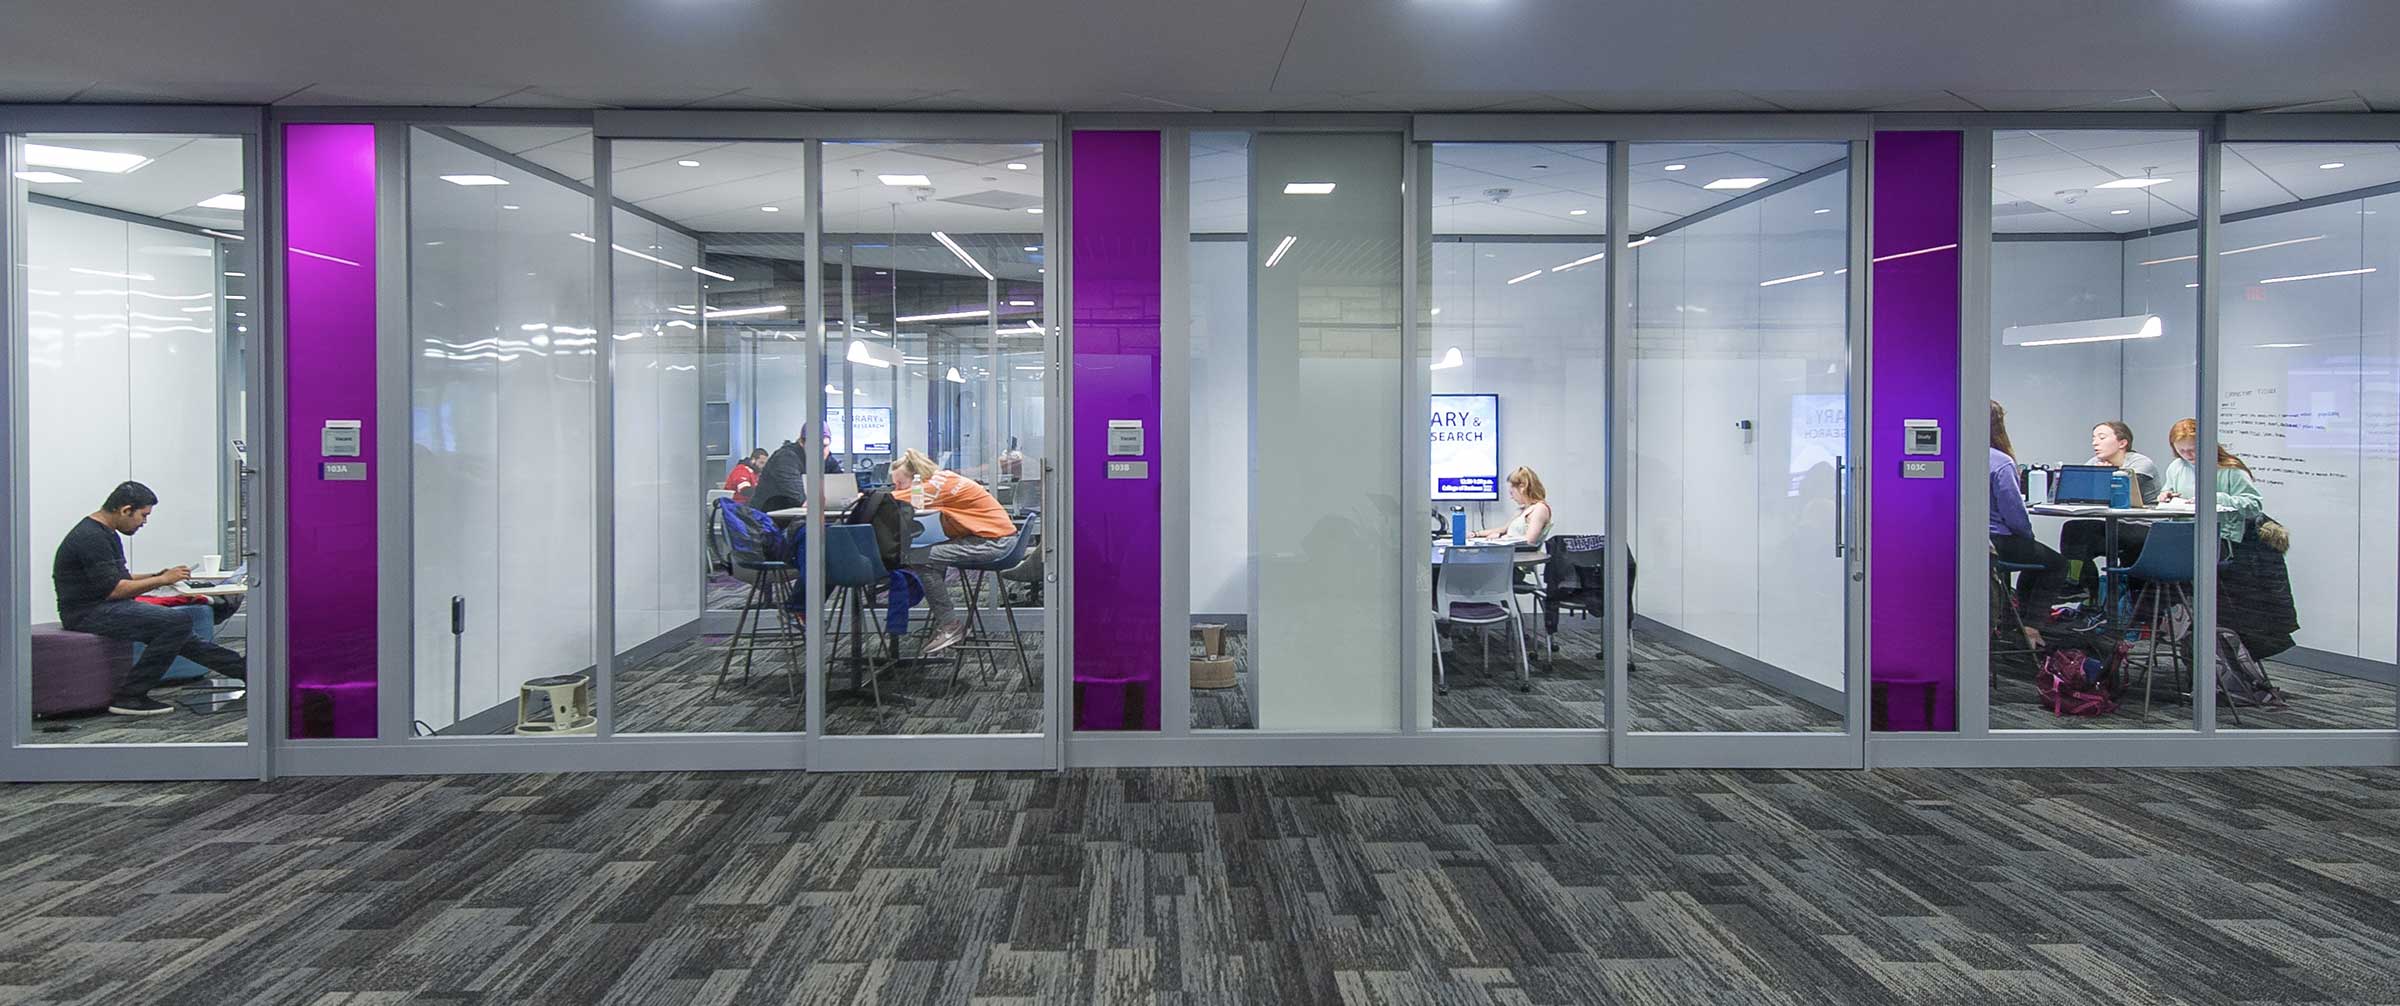 Students in collaboration rooms